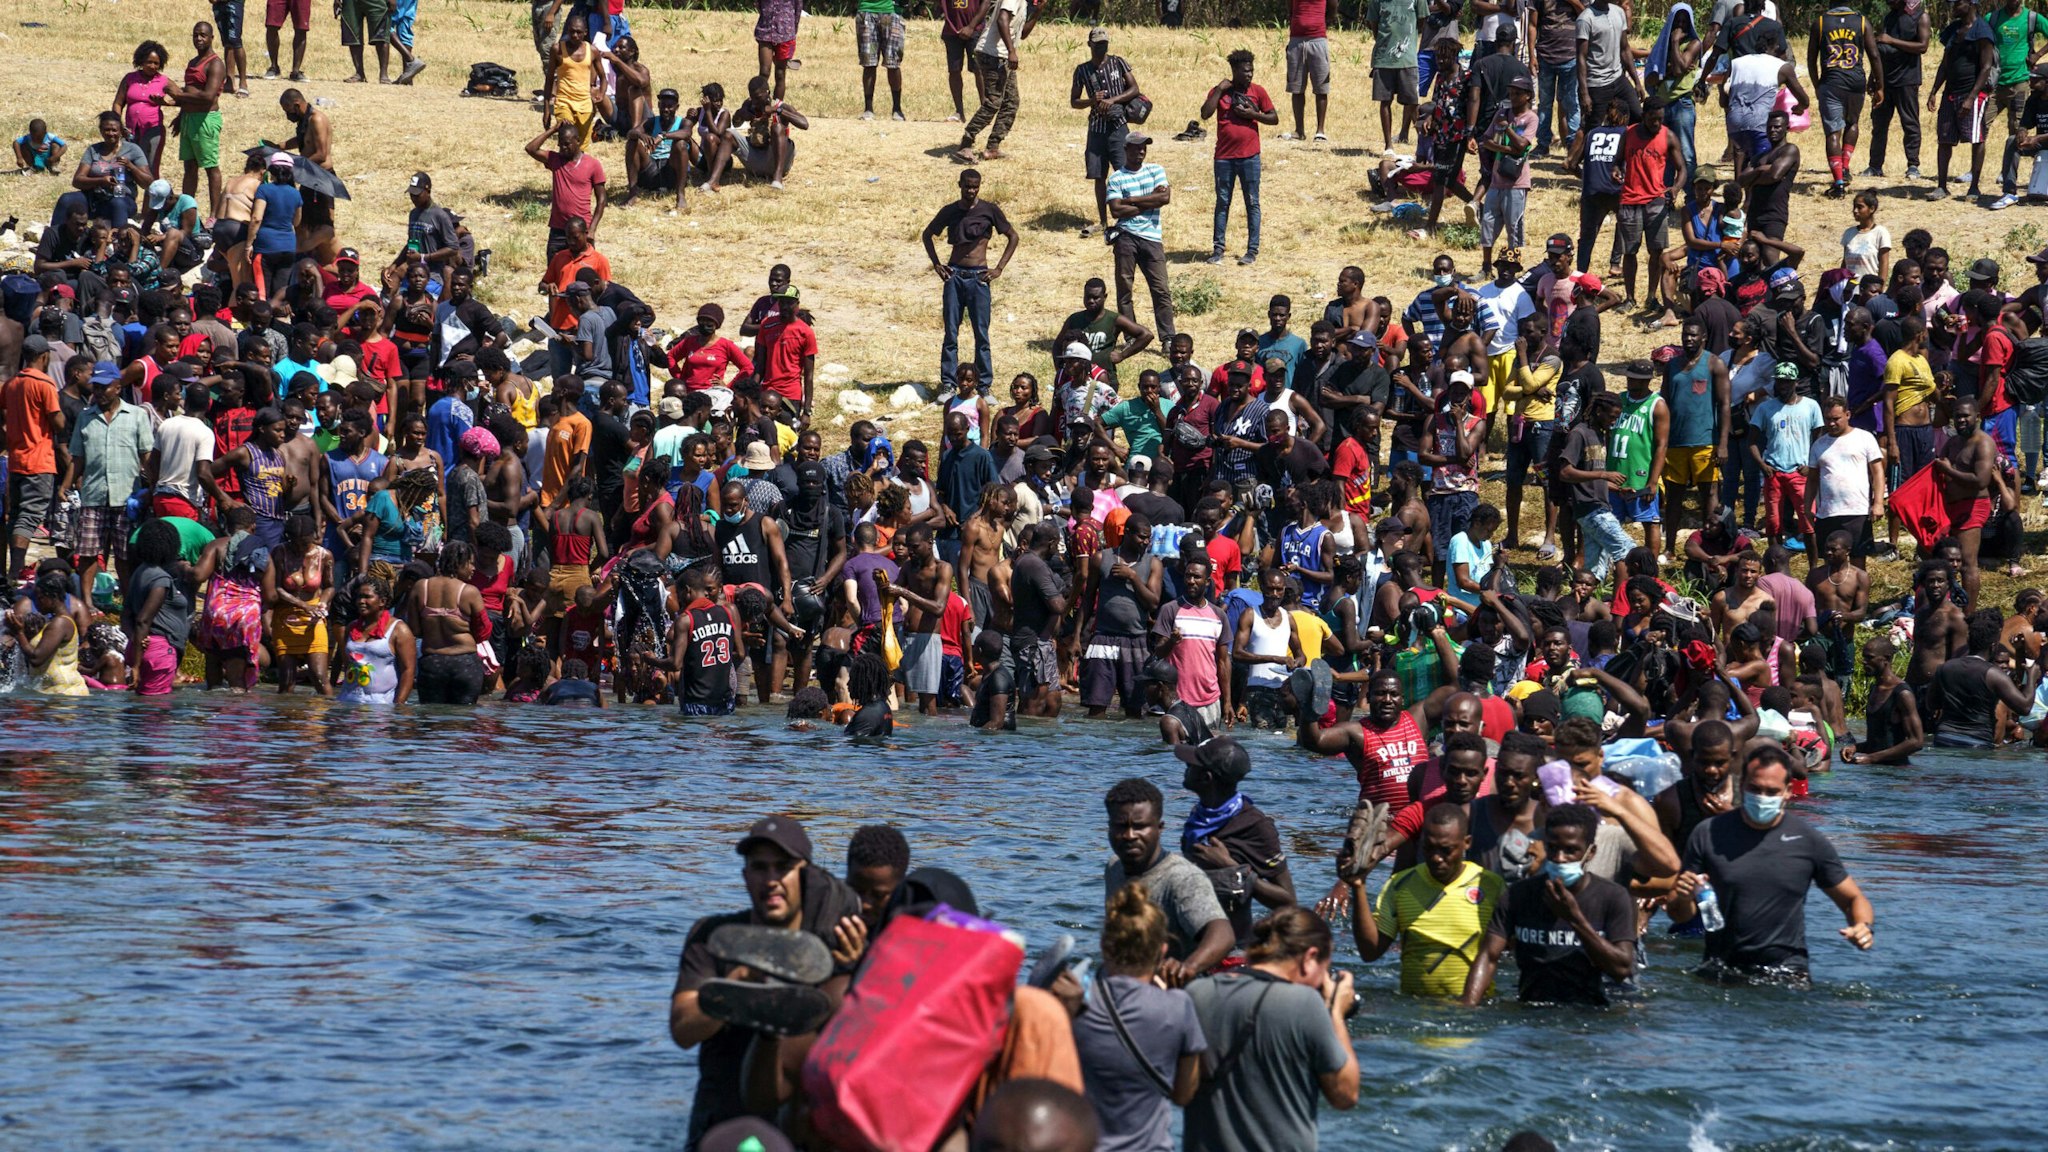 Haitian migrants, part of a group of over 10,000 people staying in an encampment on the US side of the border, cross the Rio Grande river to get food and water in Mexico, after another crossing point was closed near the Acuna Del Rio International Bridge in Del Rio, Texas on September 19, 2021. - The United States said Saturday it would ramp up deportation flights for thousands of migrants who flooded into the Texas border city of Del Rio, as authorities scramble to alleviate a burgeoning crisis for President Joe Biden's administration.